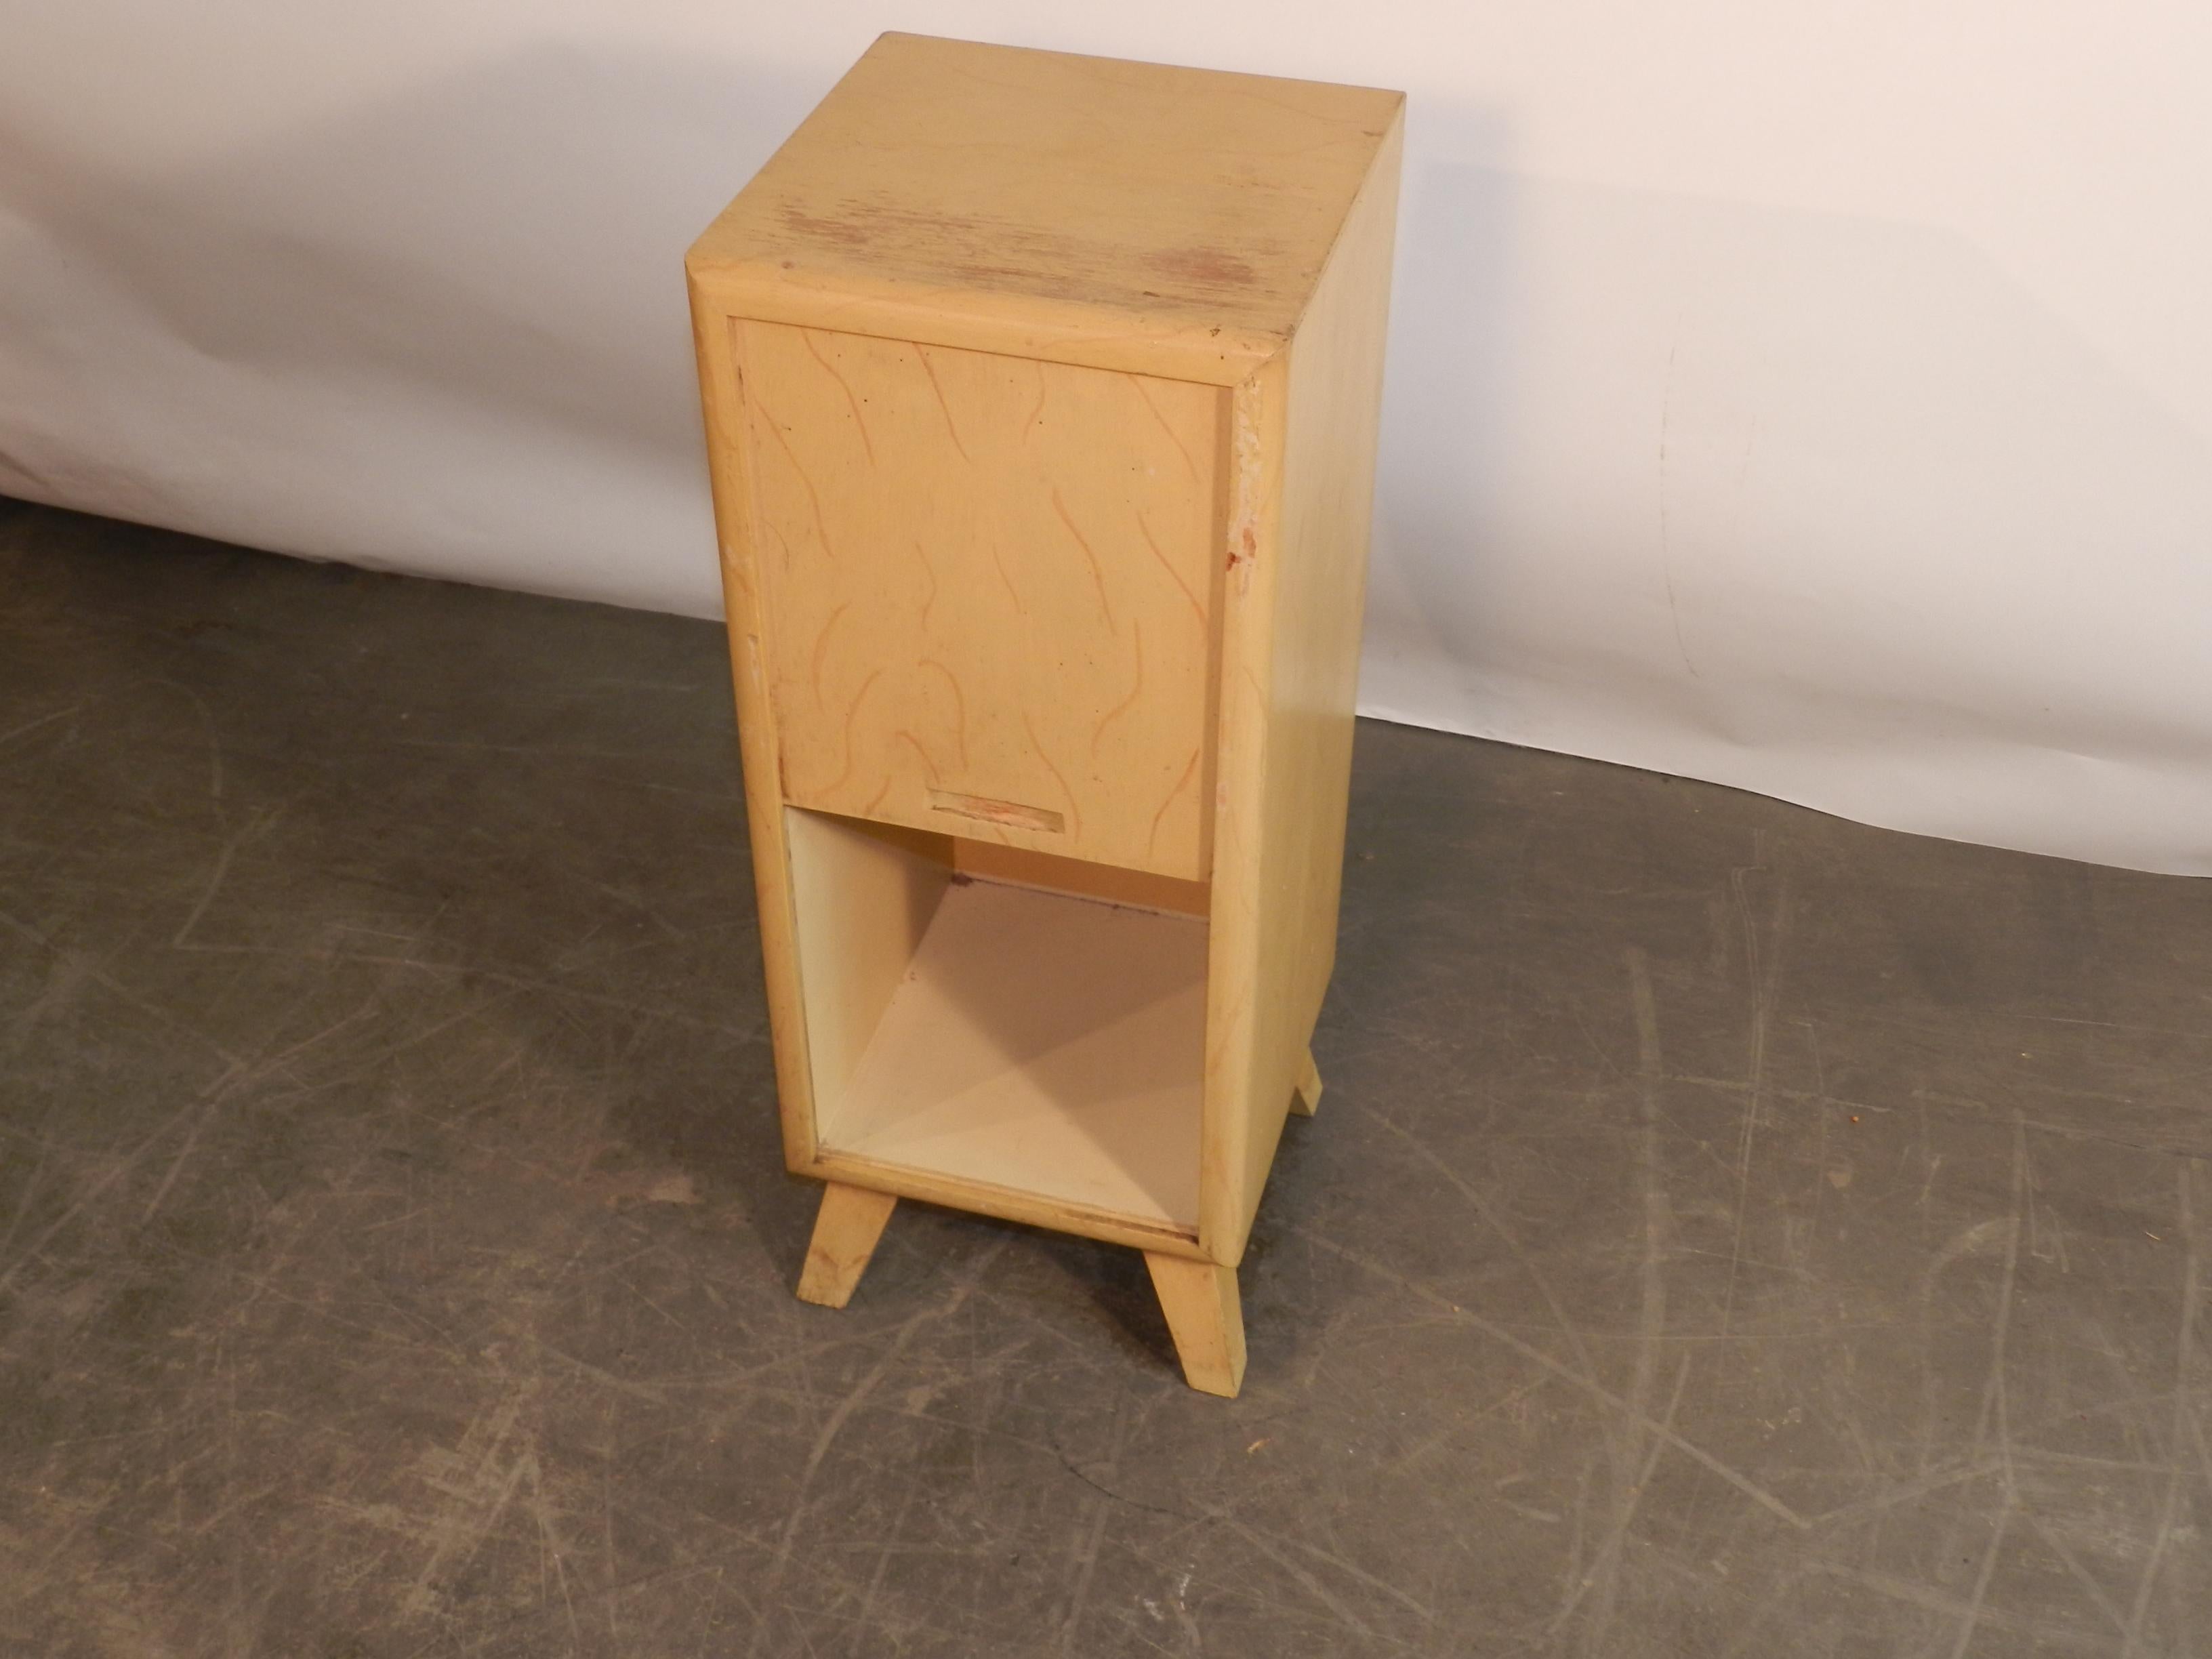 Funny little piece of furniture in painted maple, with a 